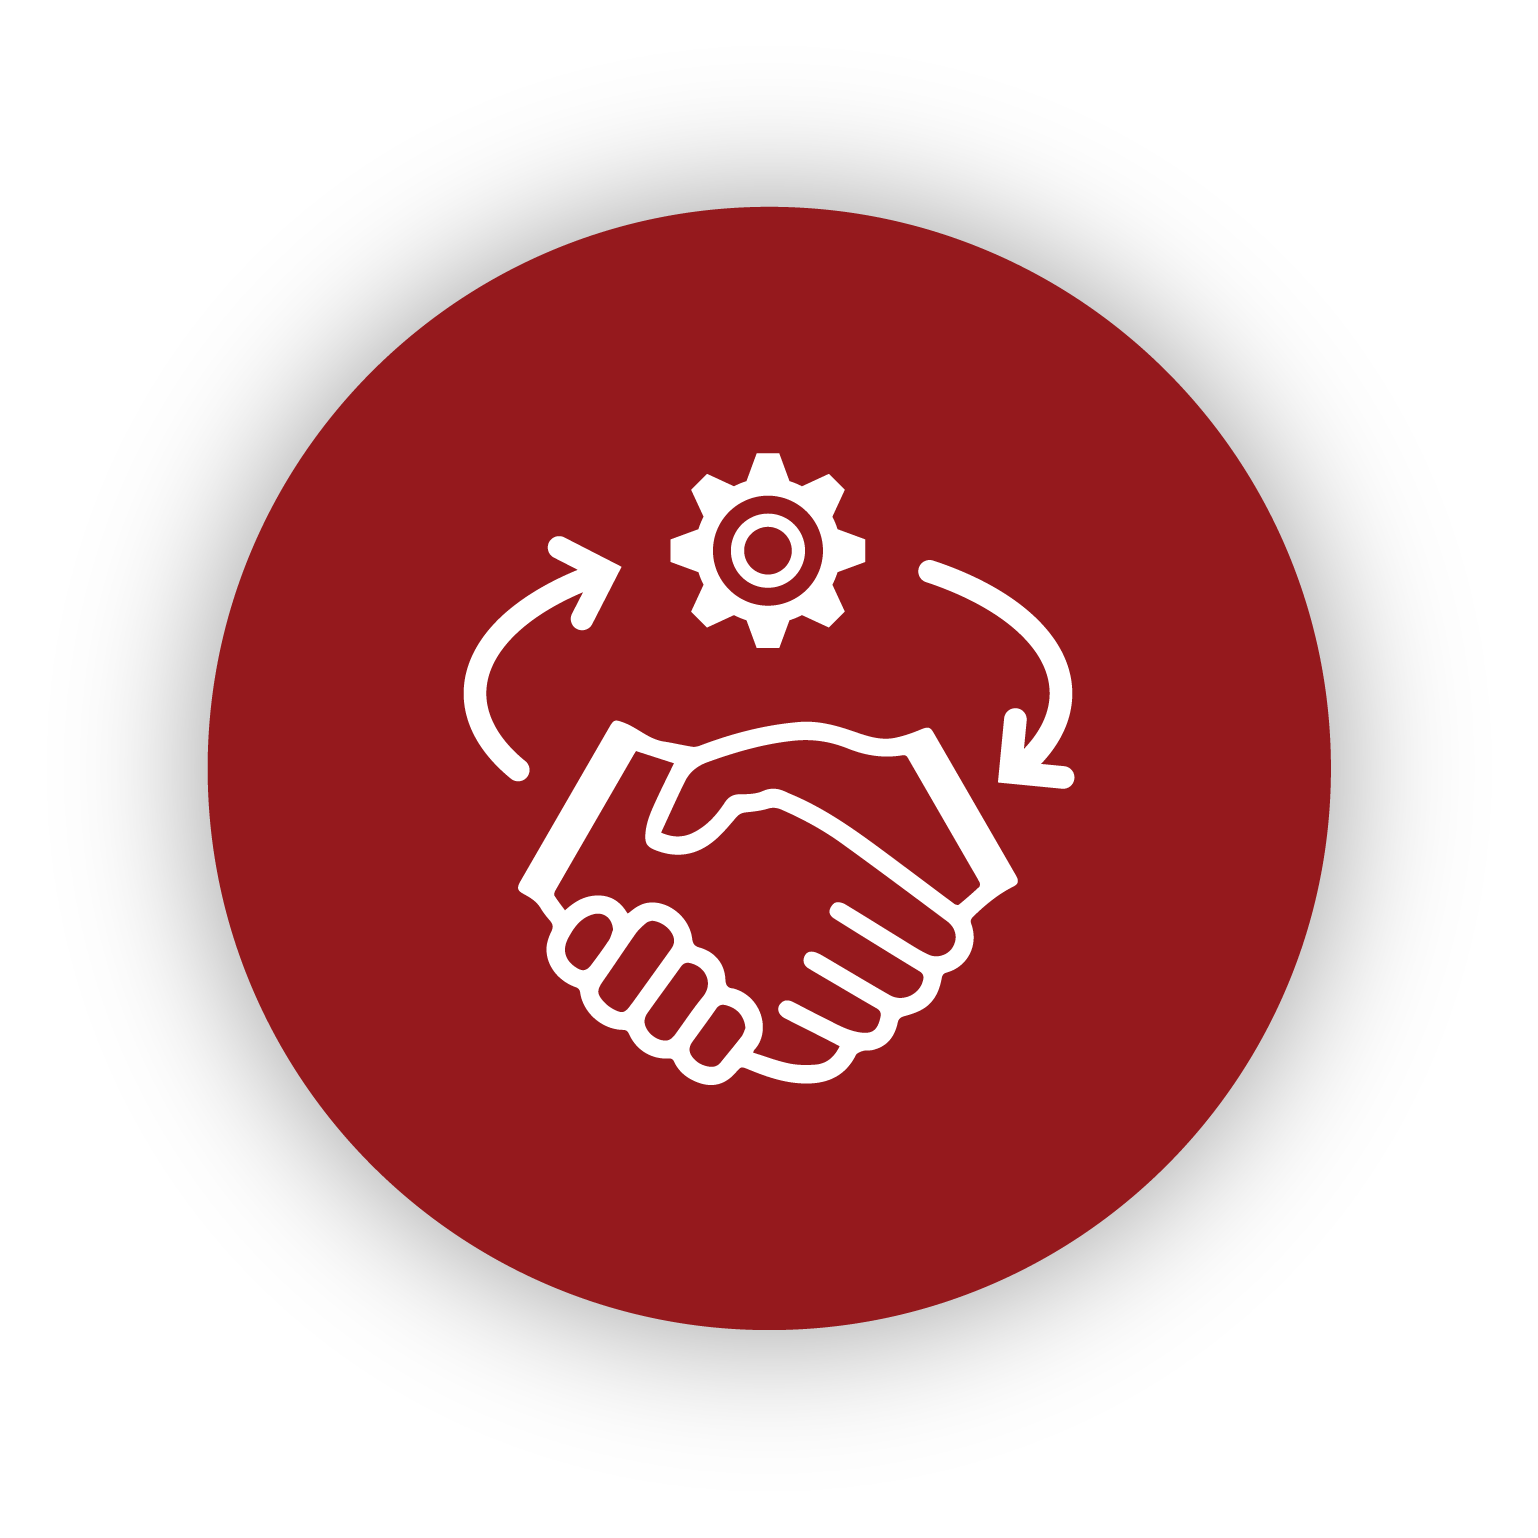 icon of a handshake with arrows